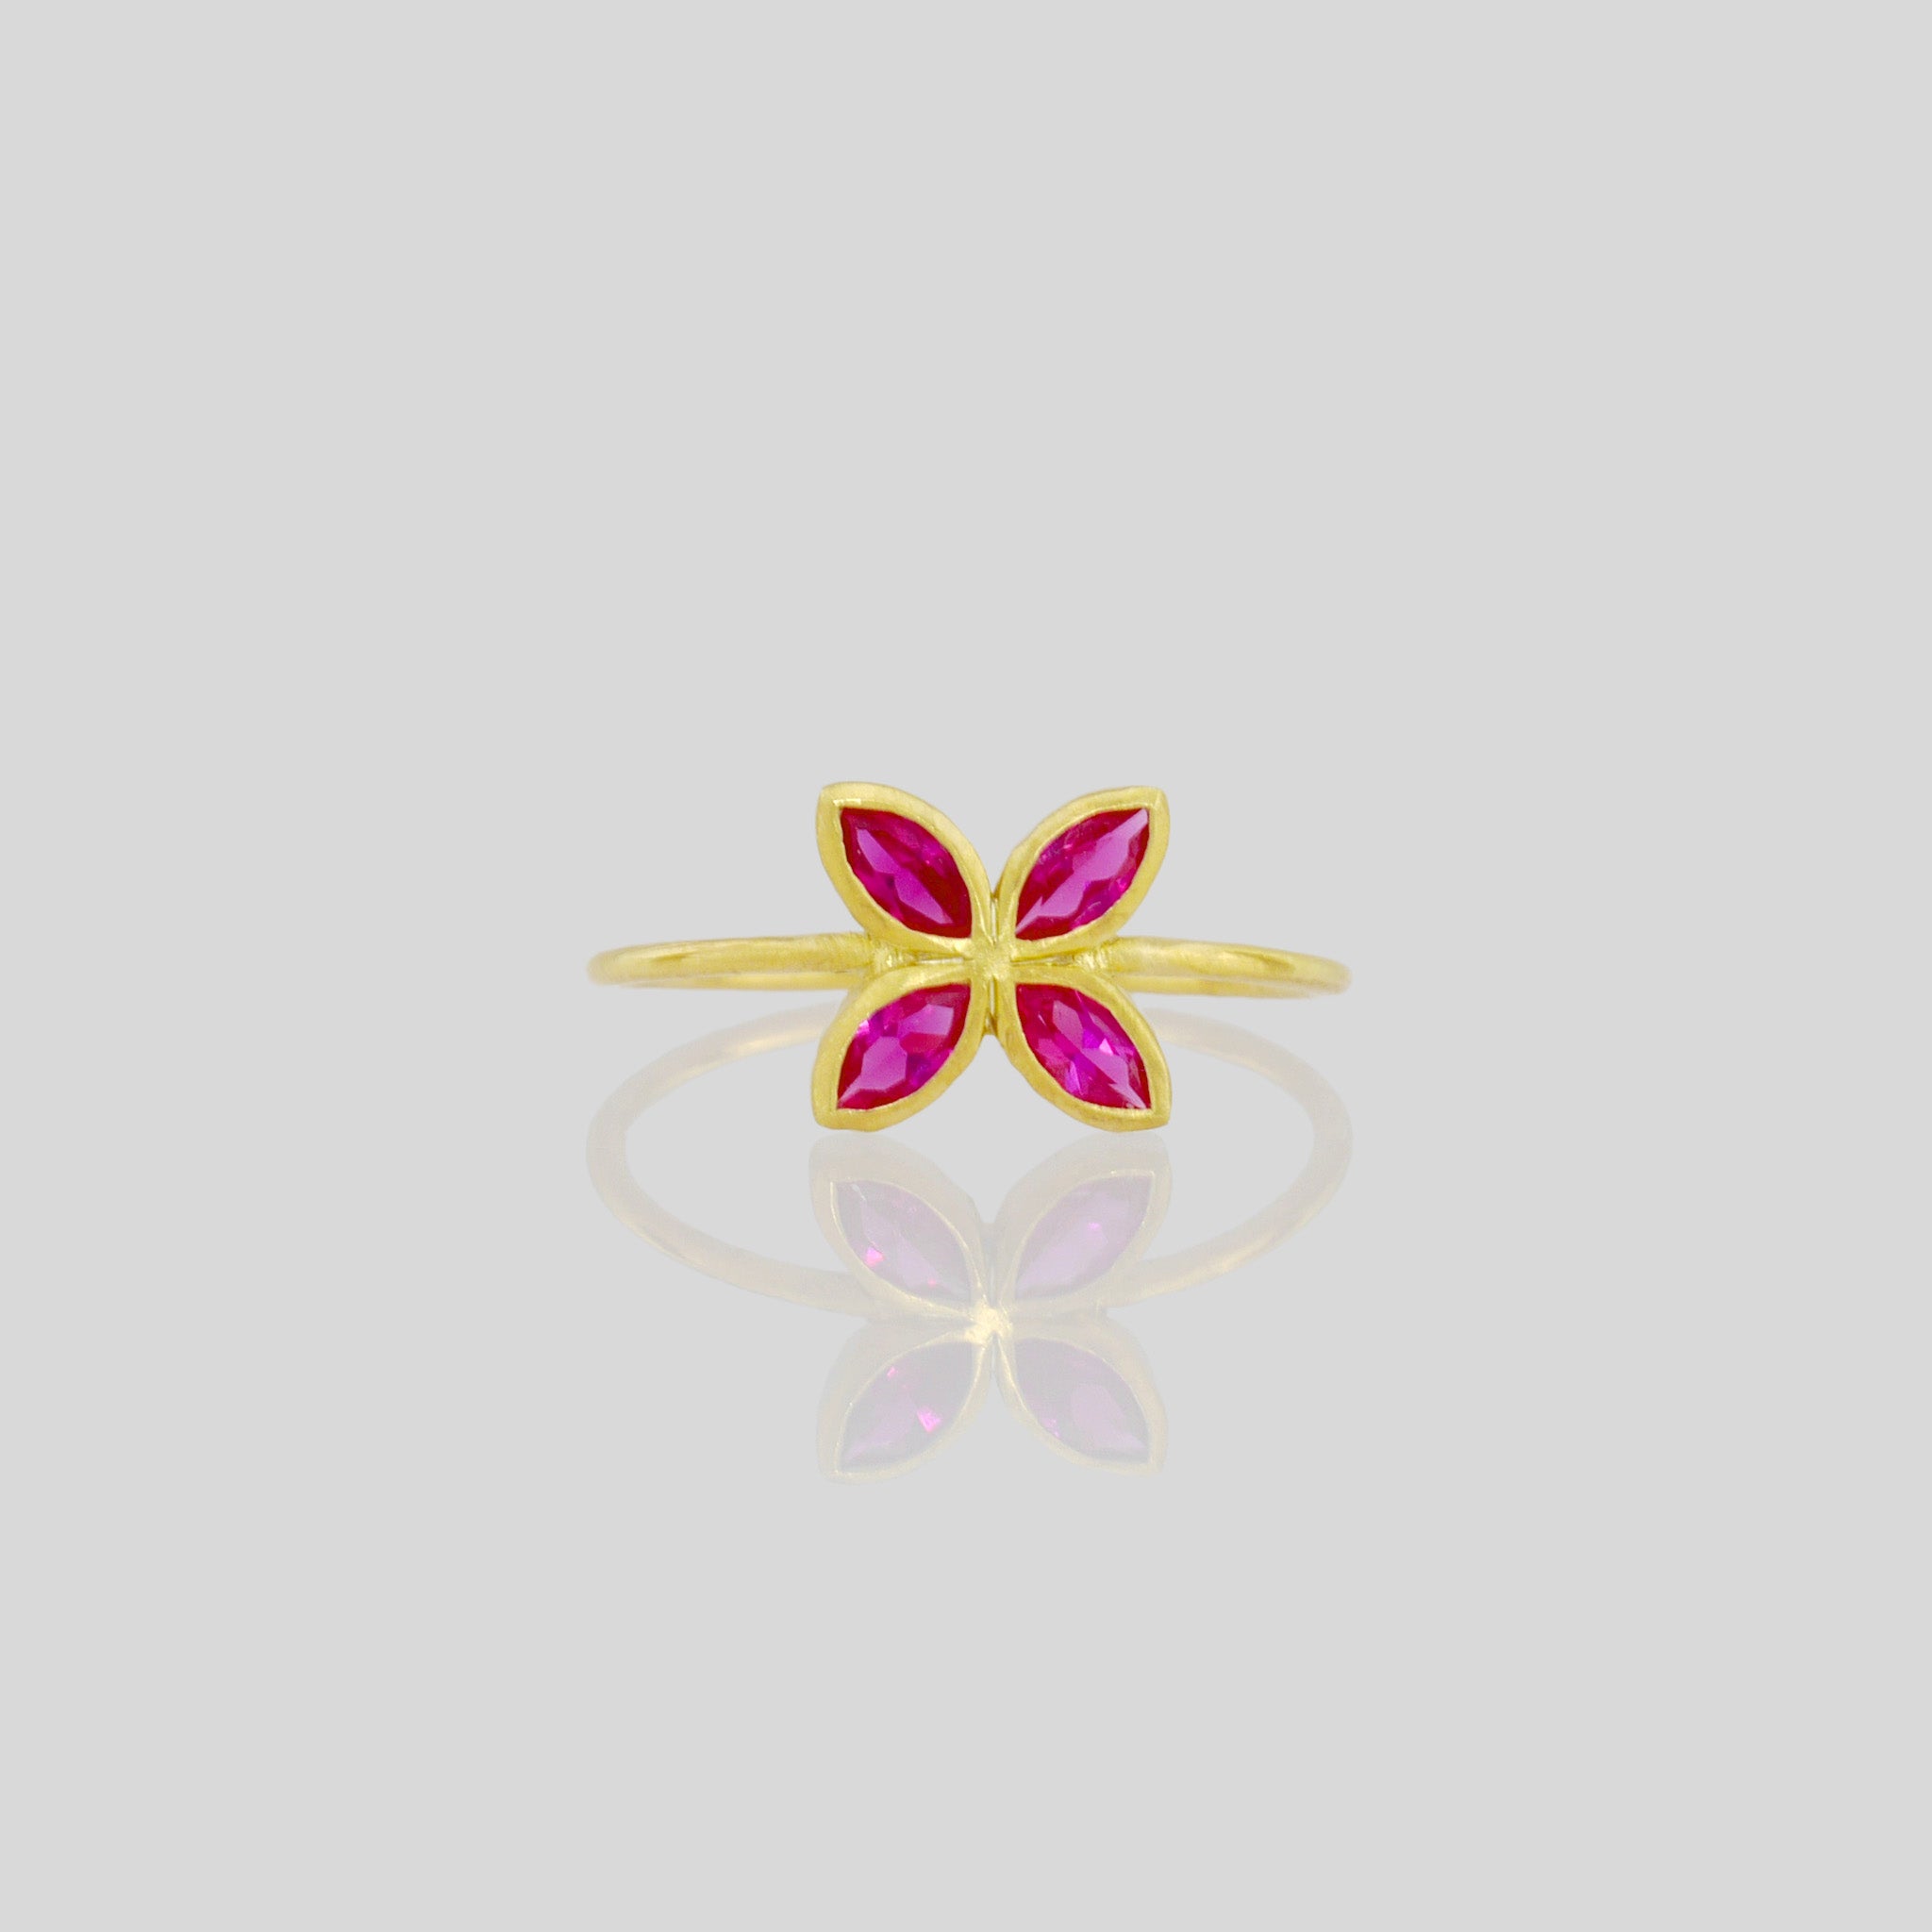 Front view of Delicate Gold ring with Ruby marquise in a flower-shaped design. Radiant and cheerful addition to any collection.